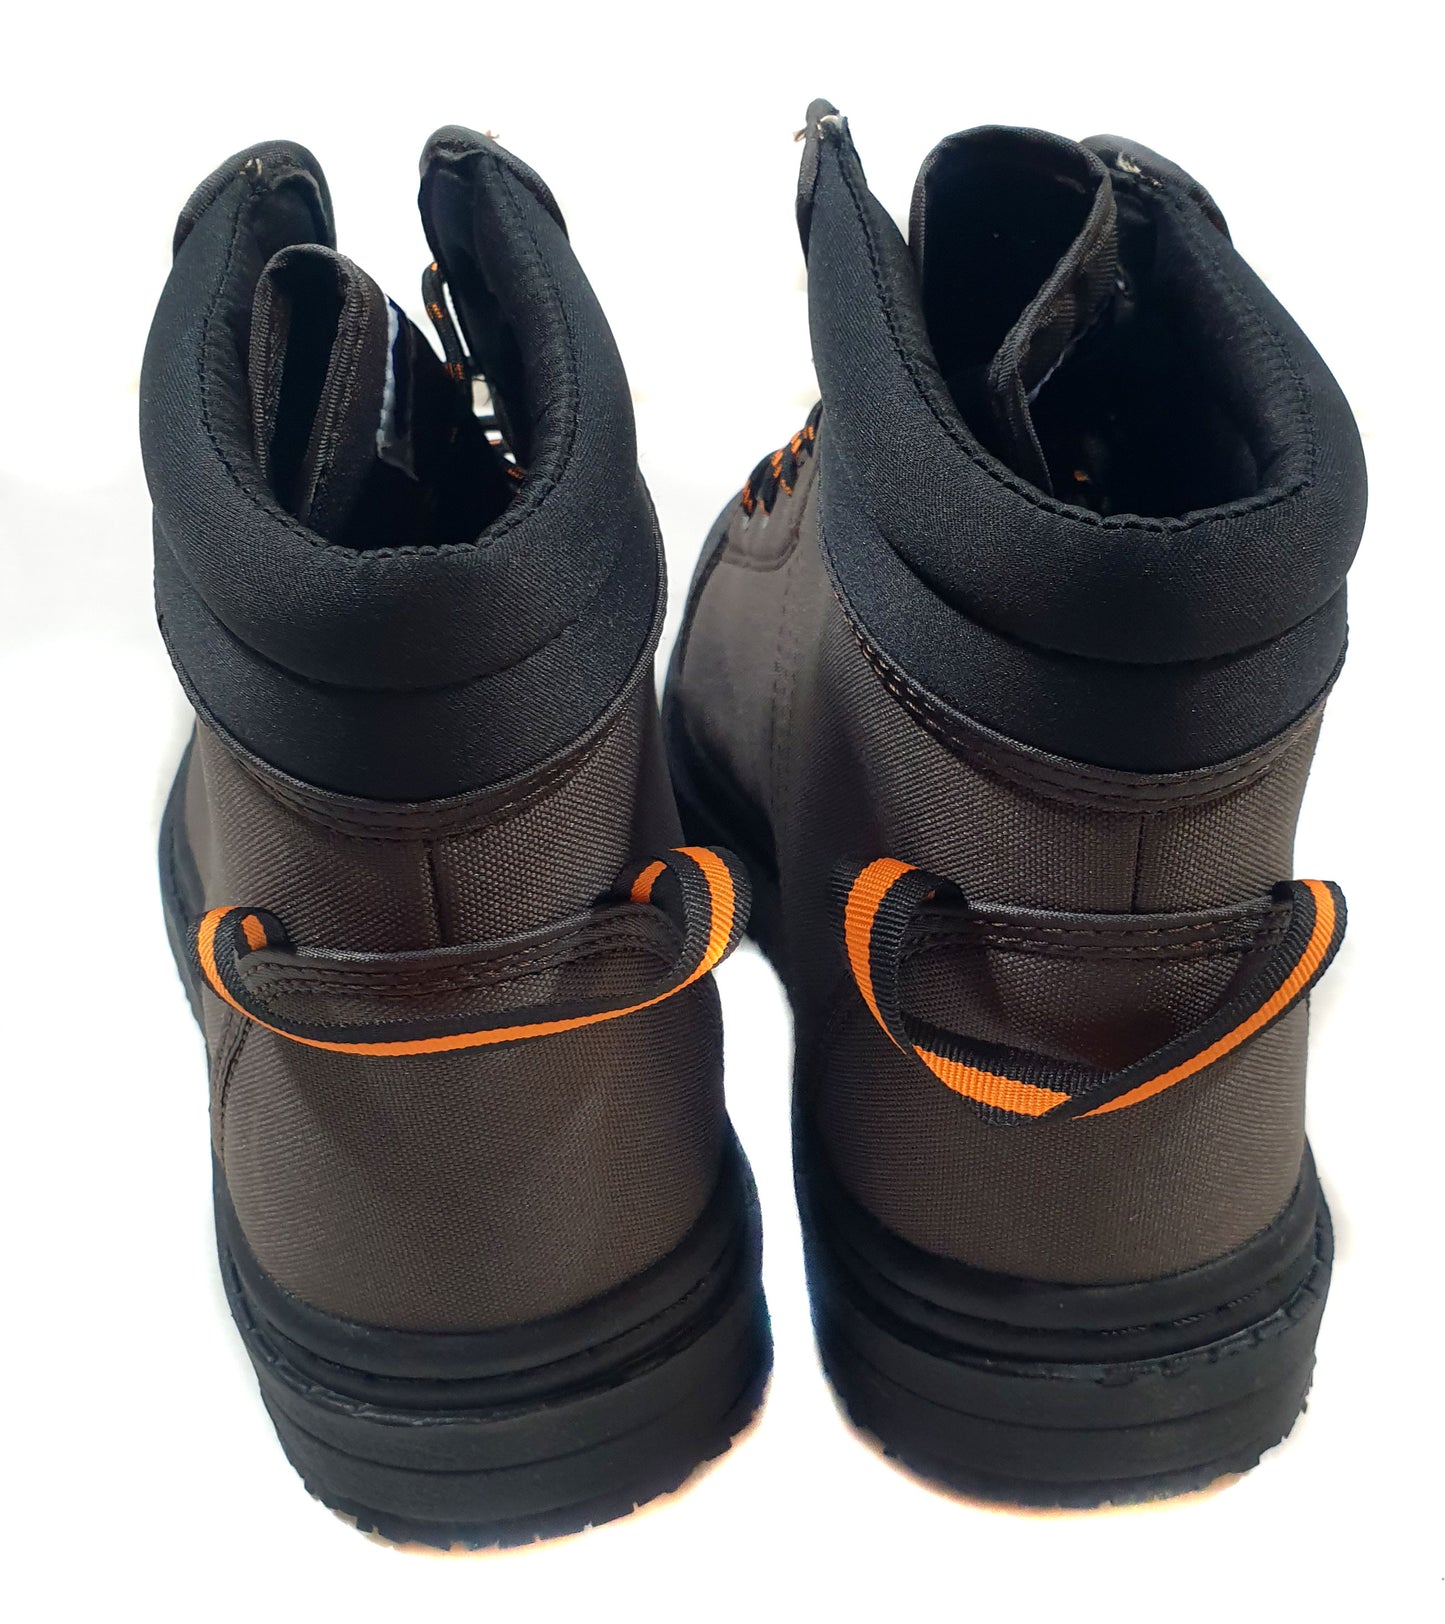 BISON MK2 WADING BOOTS IN FELT SOLE OR RUBBER SOLE WITH FREE WADING STUDS